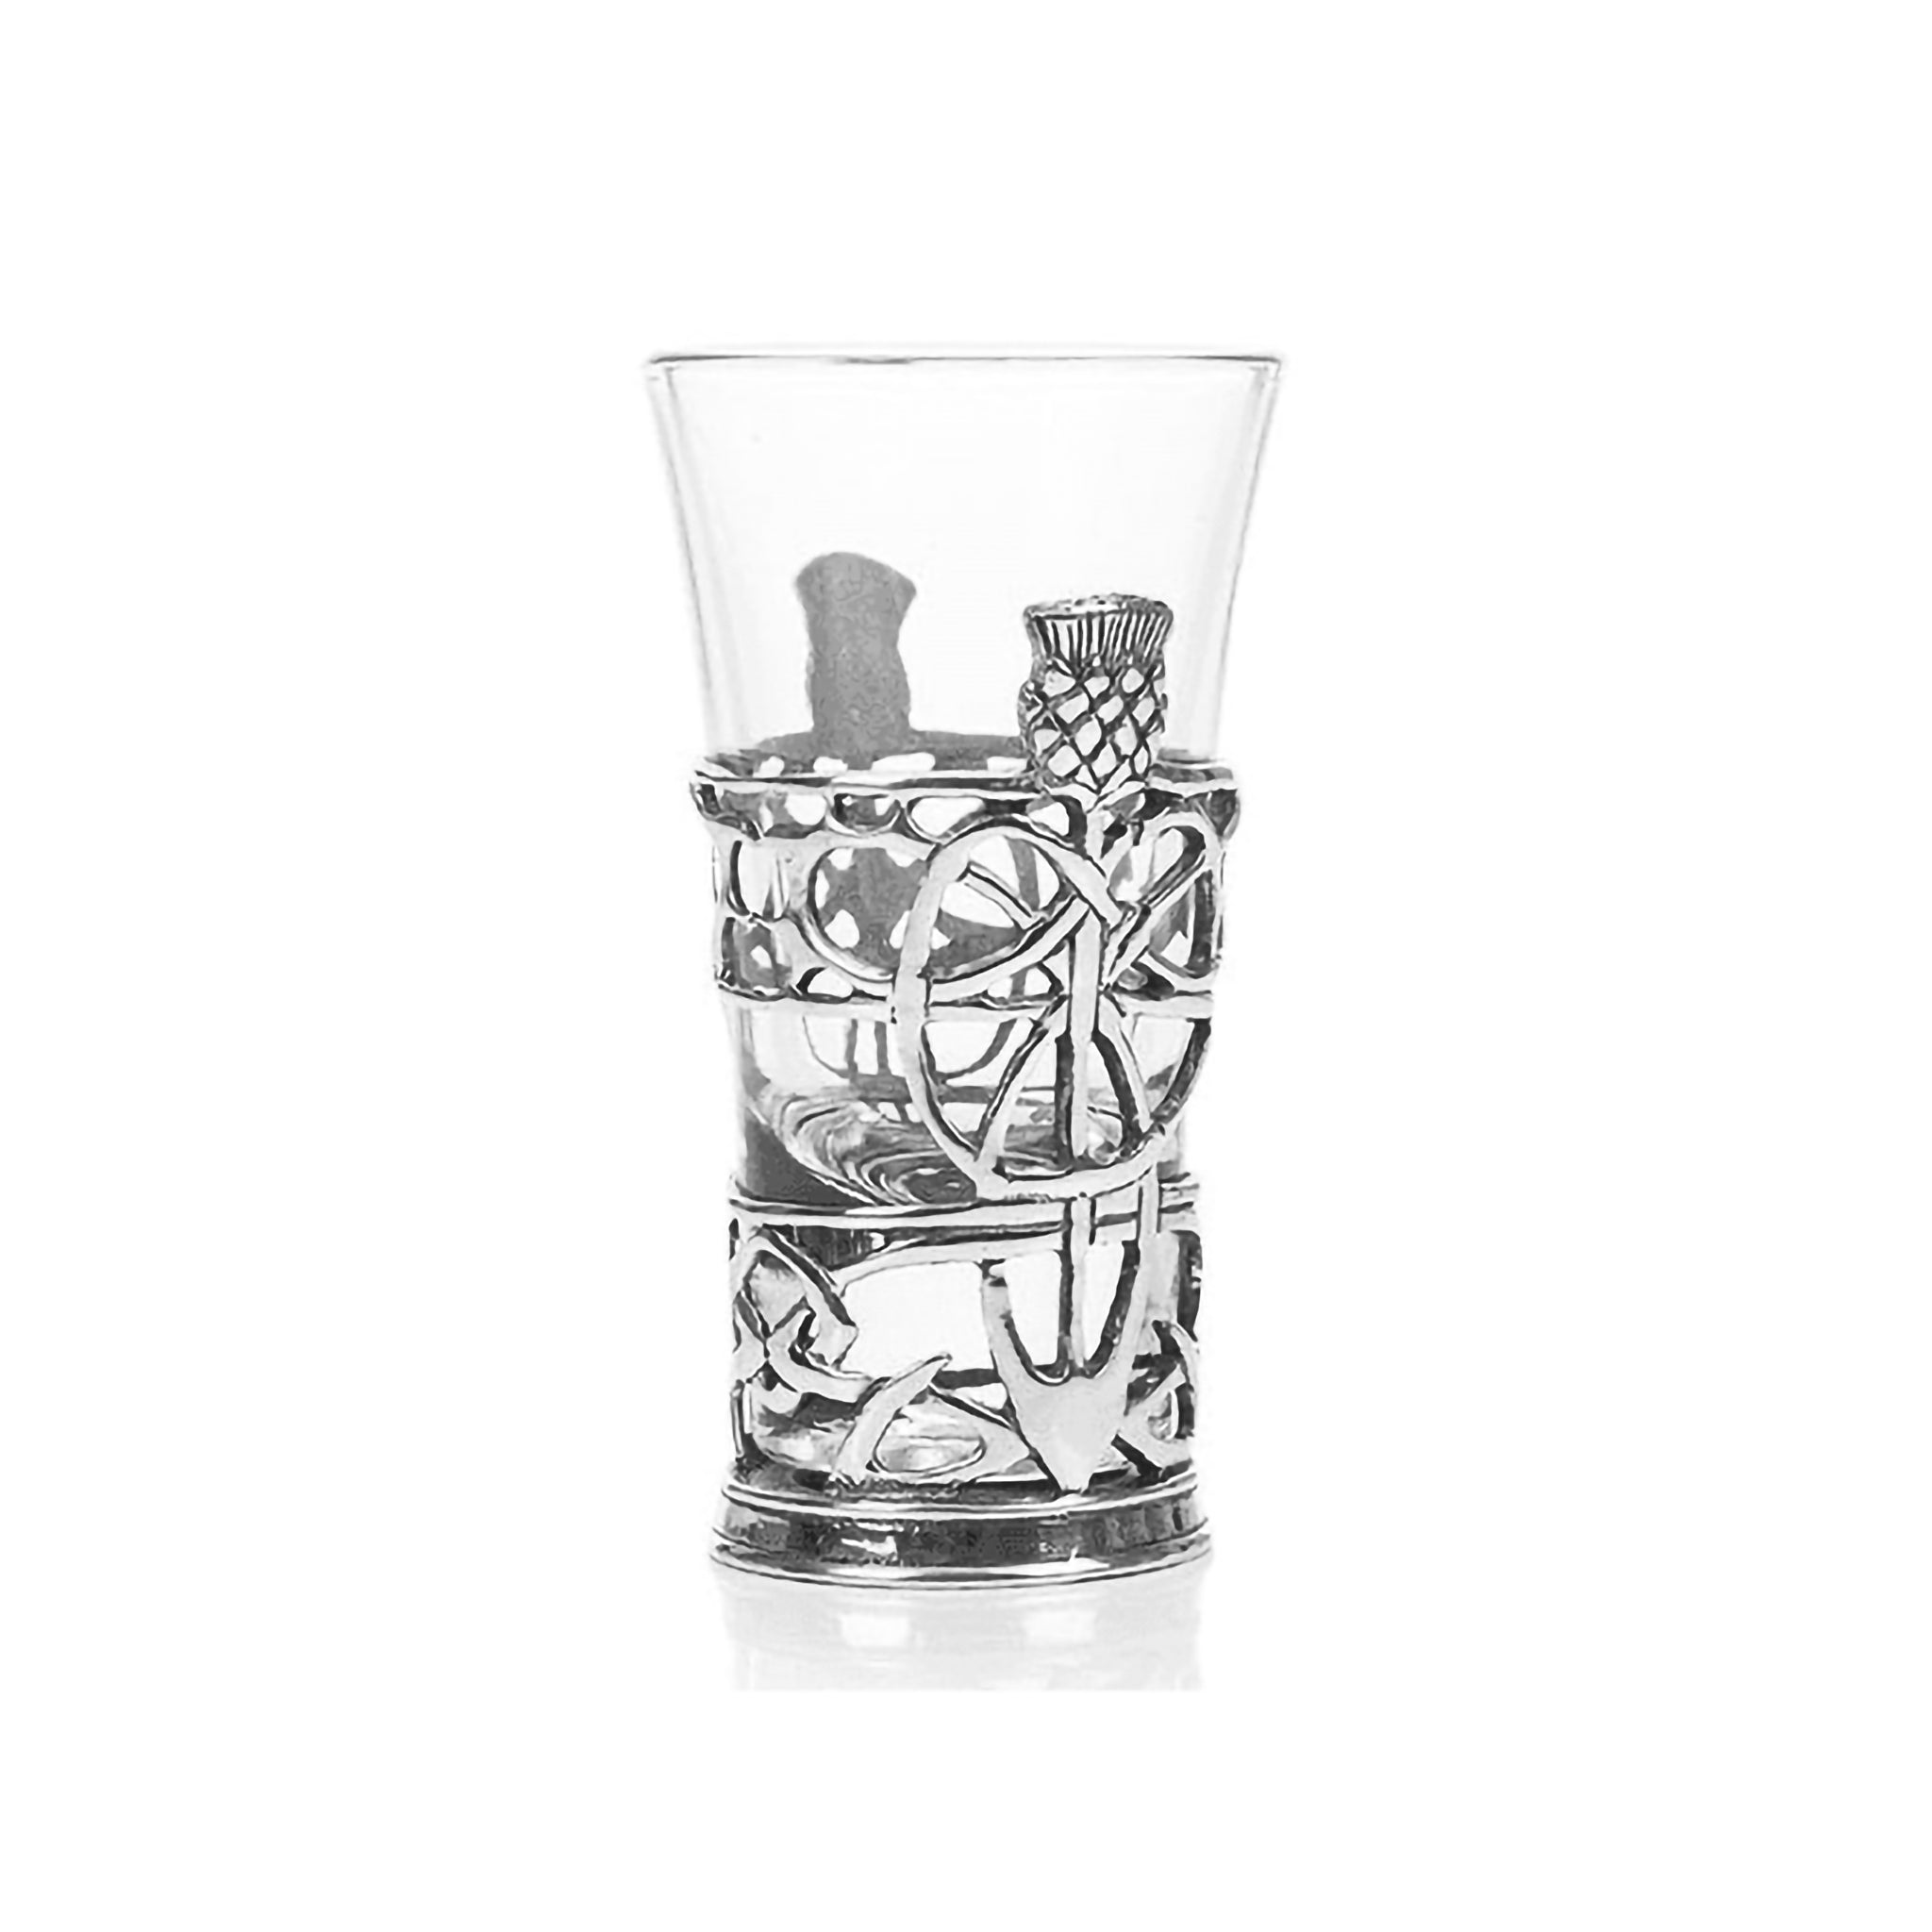 Glass shot glass with a pewter base featuring Scottish thistles and Celtic knot designs